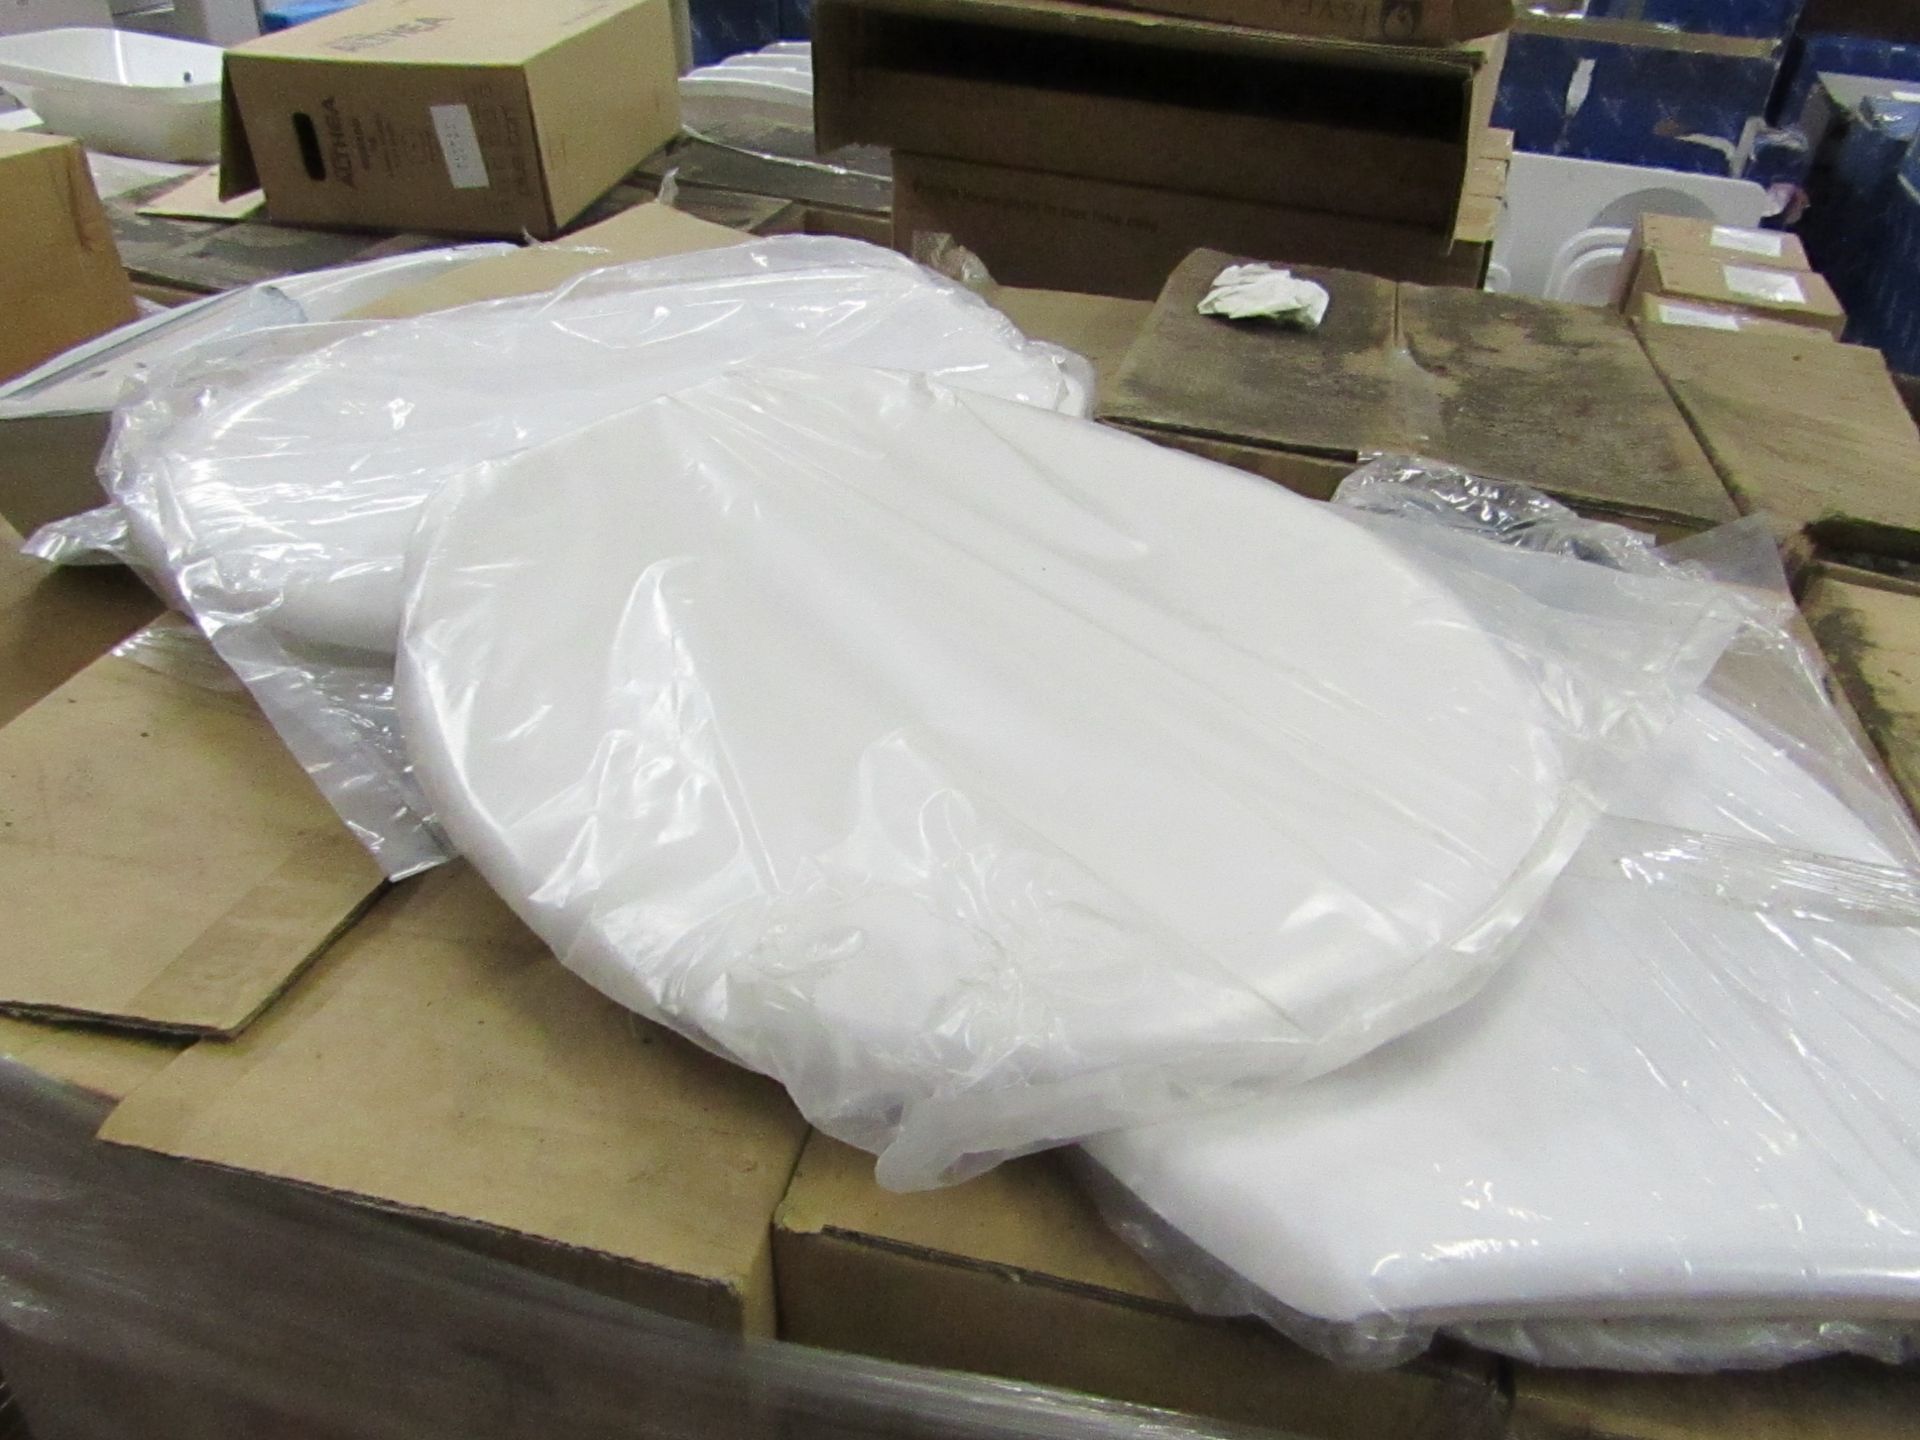 5x Unbranded Rica toilet seats, new.